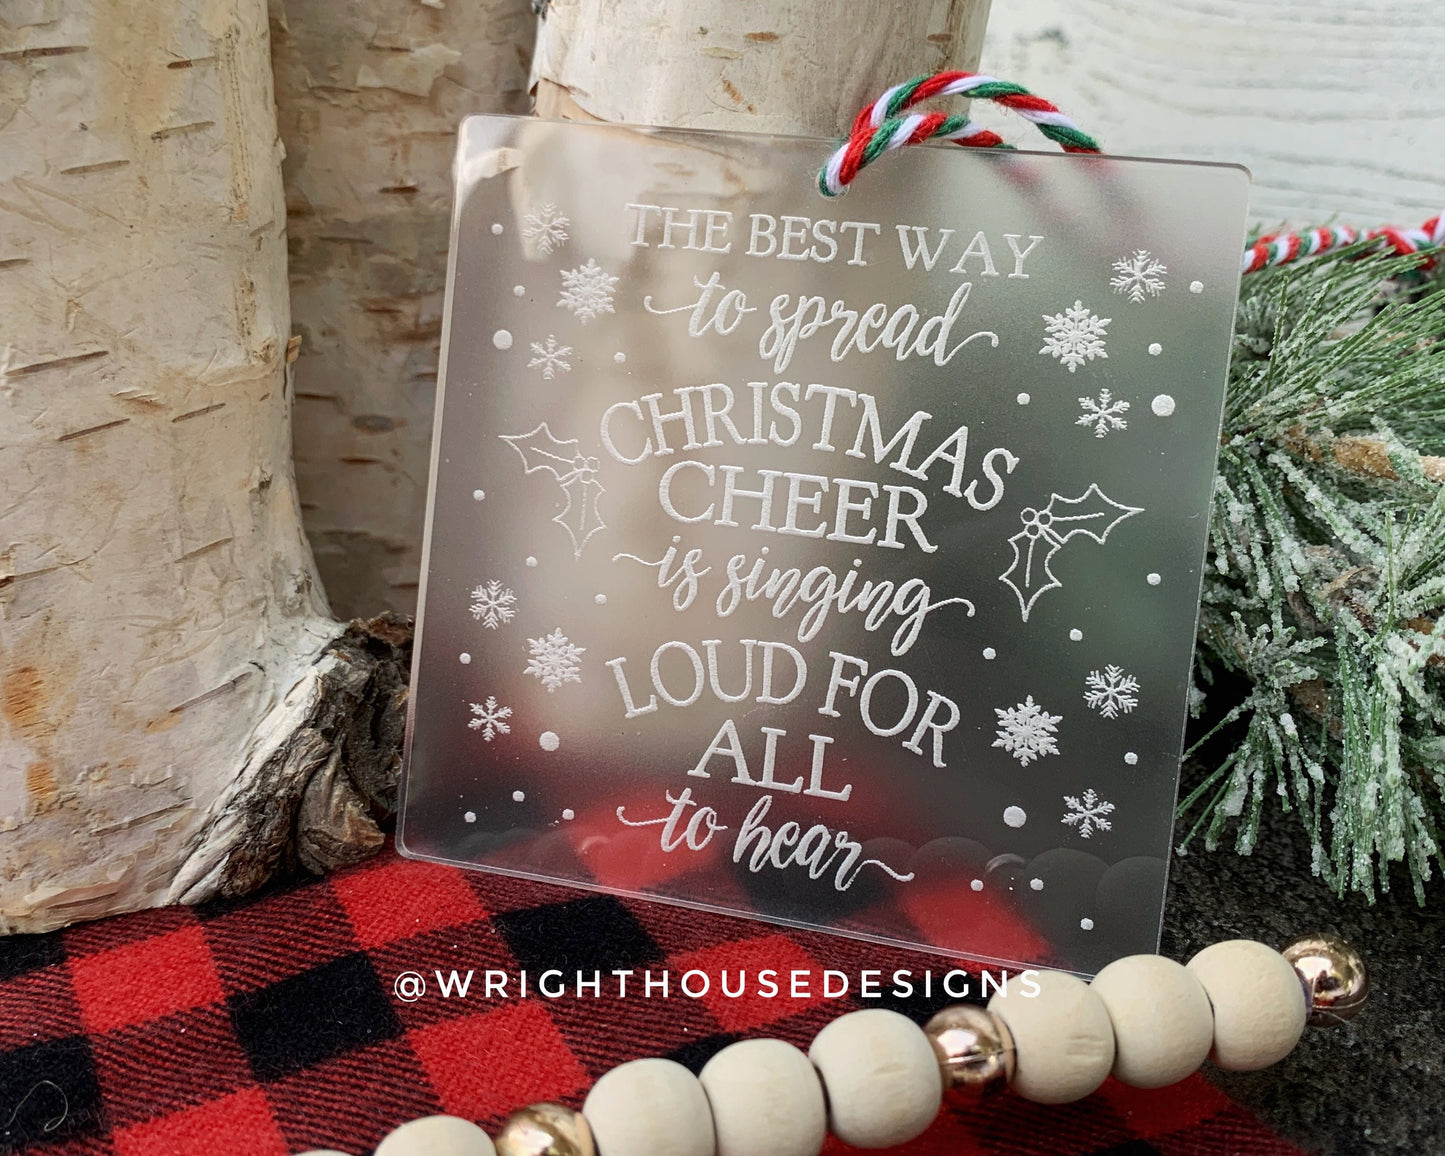 The Best Way to Spread Christmas Cheer is Singing Loud for All to Hear - Engraved Frosted Acrylic - Christmas Tree Ornament - Elf Quote